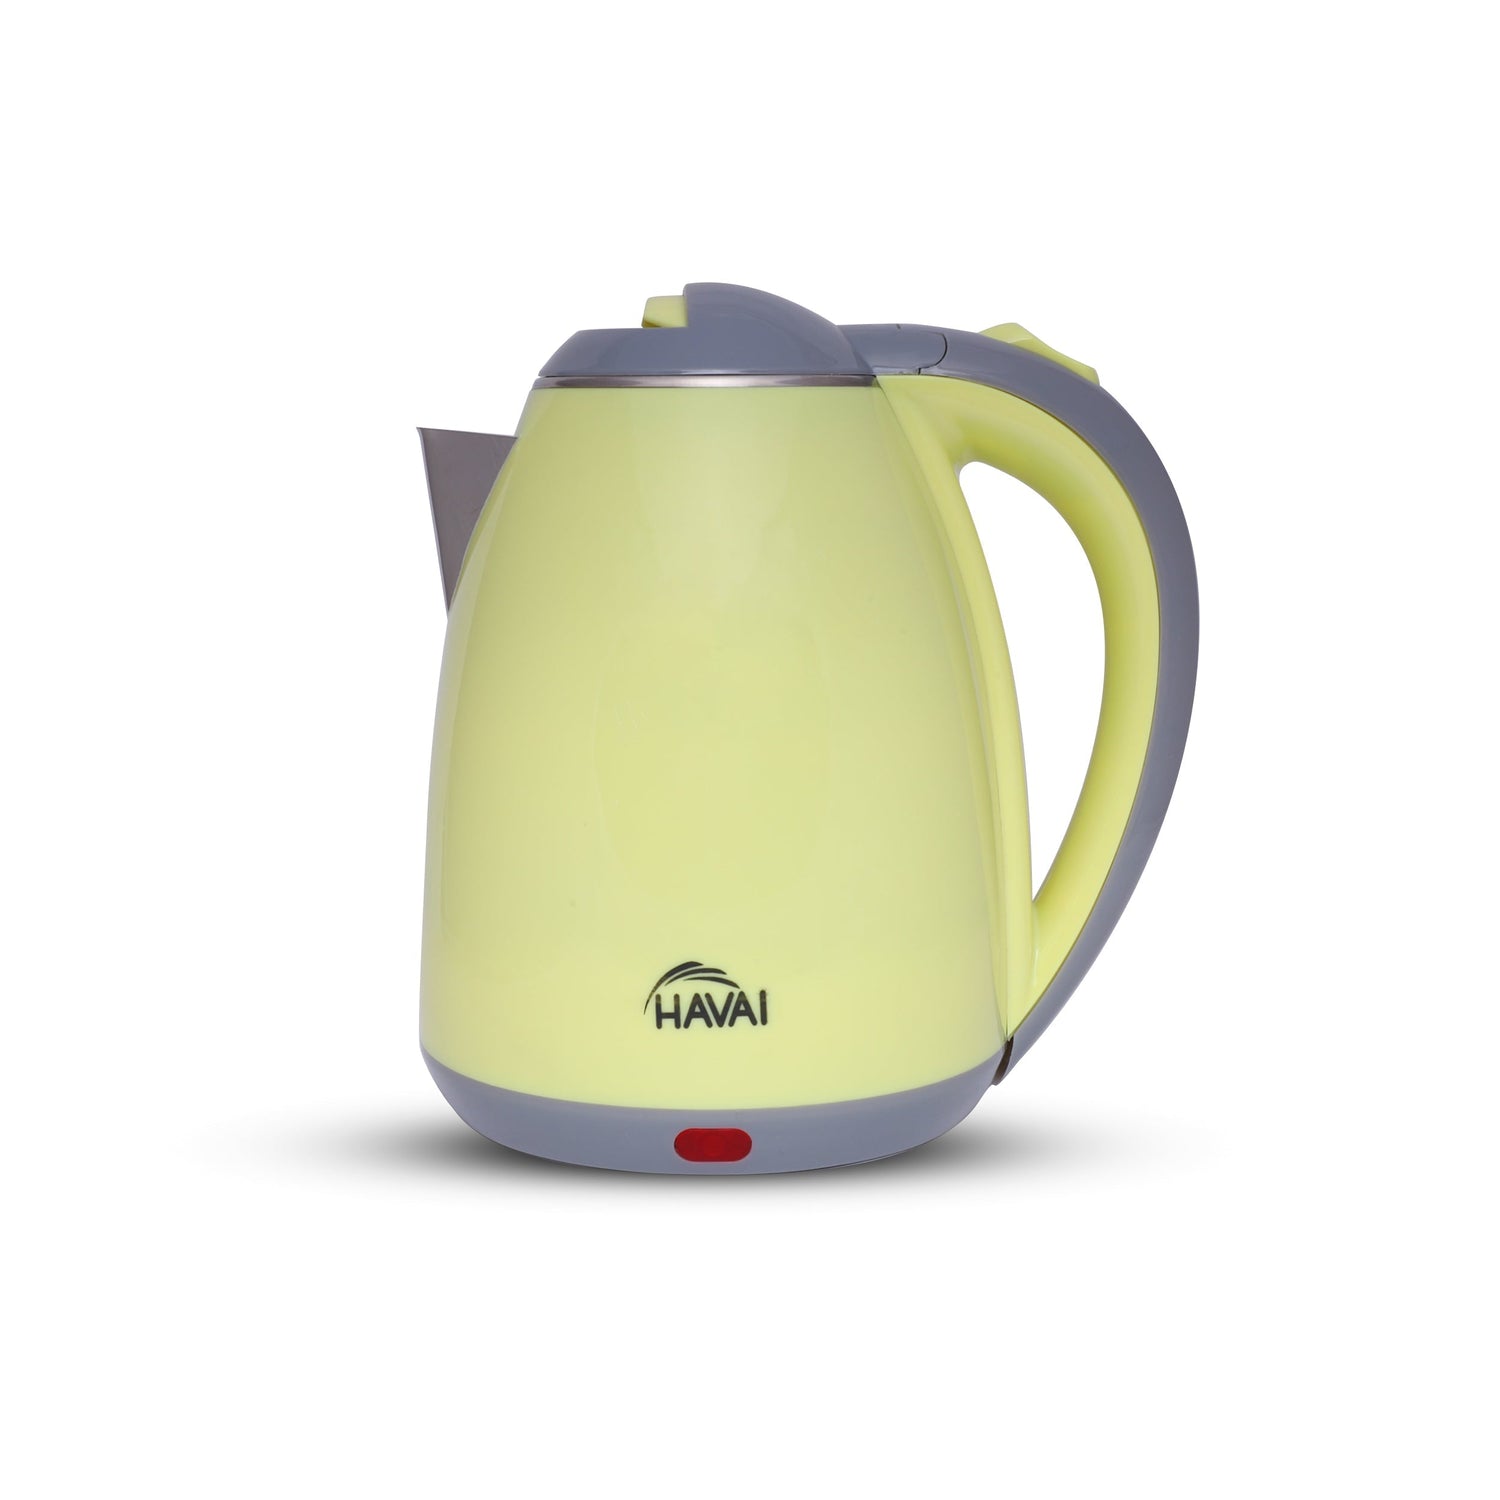 HAVAI Large Premium Electric Kettle 1.8L |Stainless Steel Inner Body | Auto Power Cut | Boil Dry Protection &amp; Cool Touch Double Wall | Portable | 1500 Watts |1 Year Warranty - STAINLESS STEEL